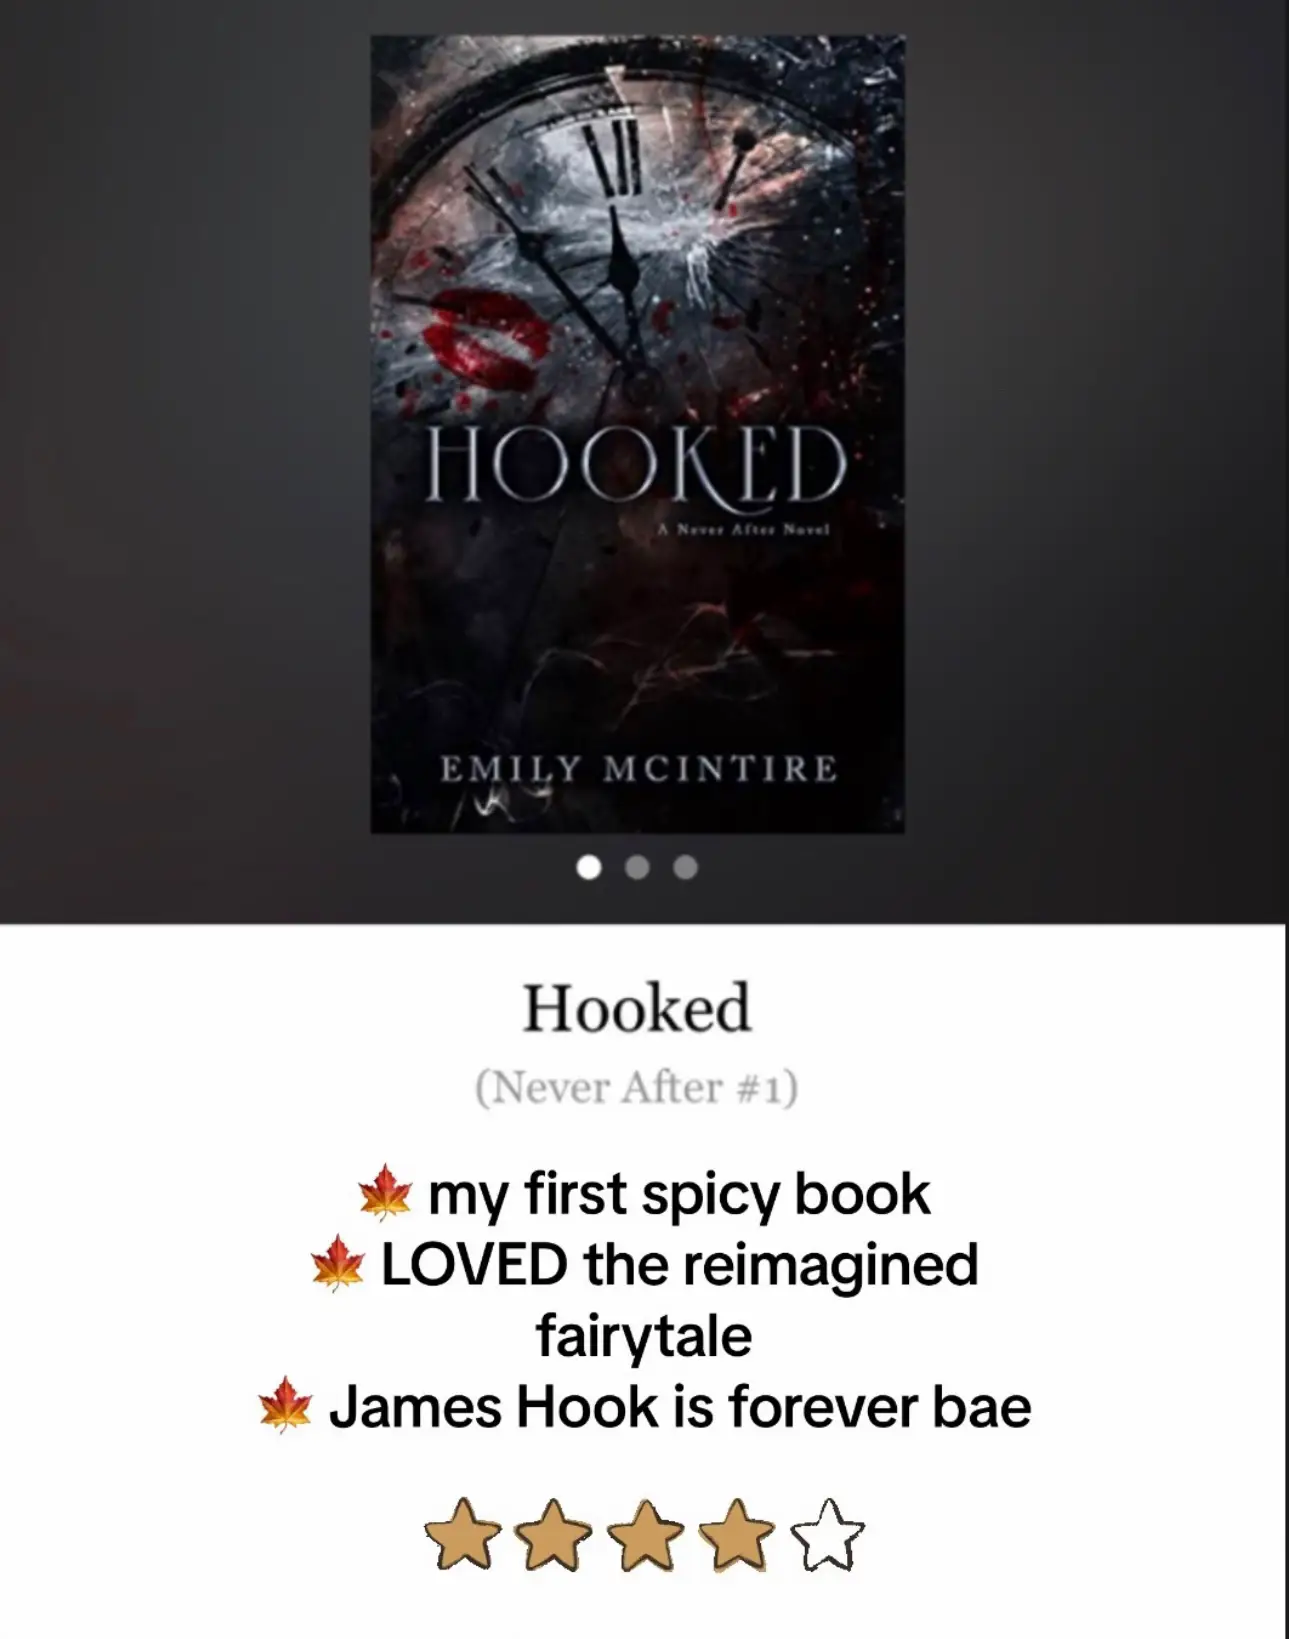 Hooked (Never After, #1) by Emily McIntire